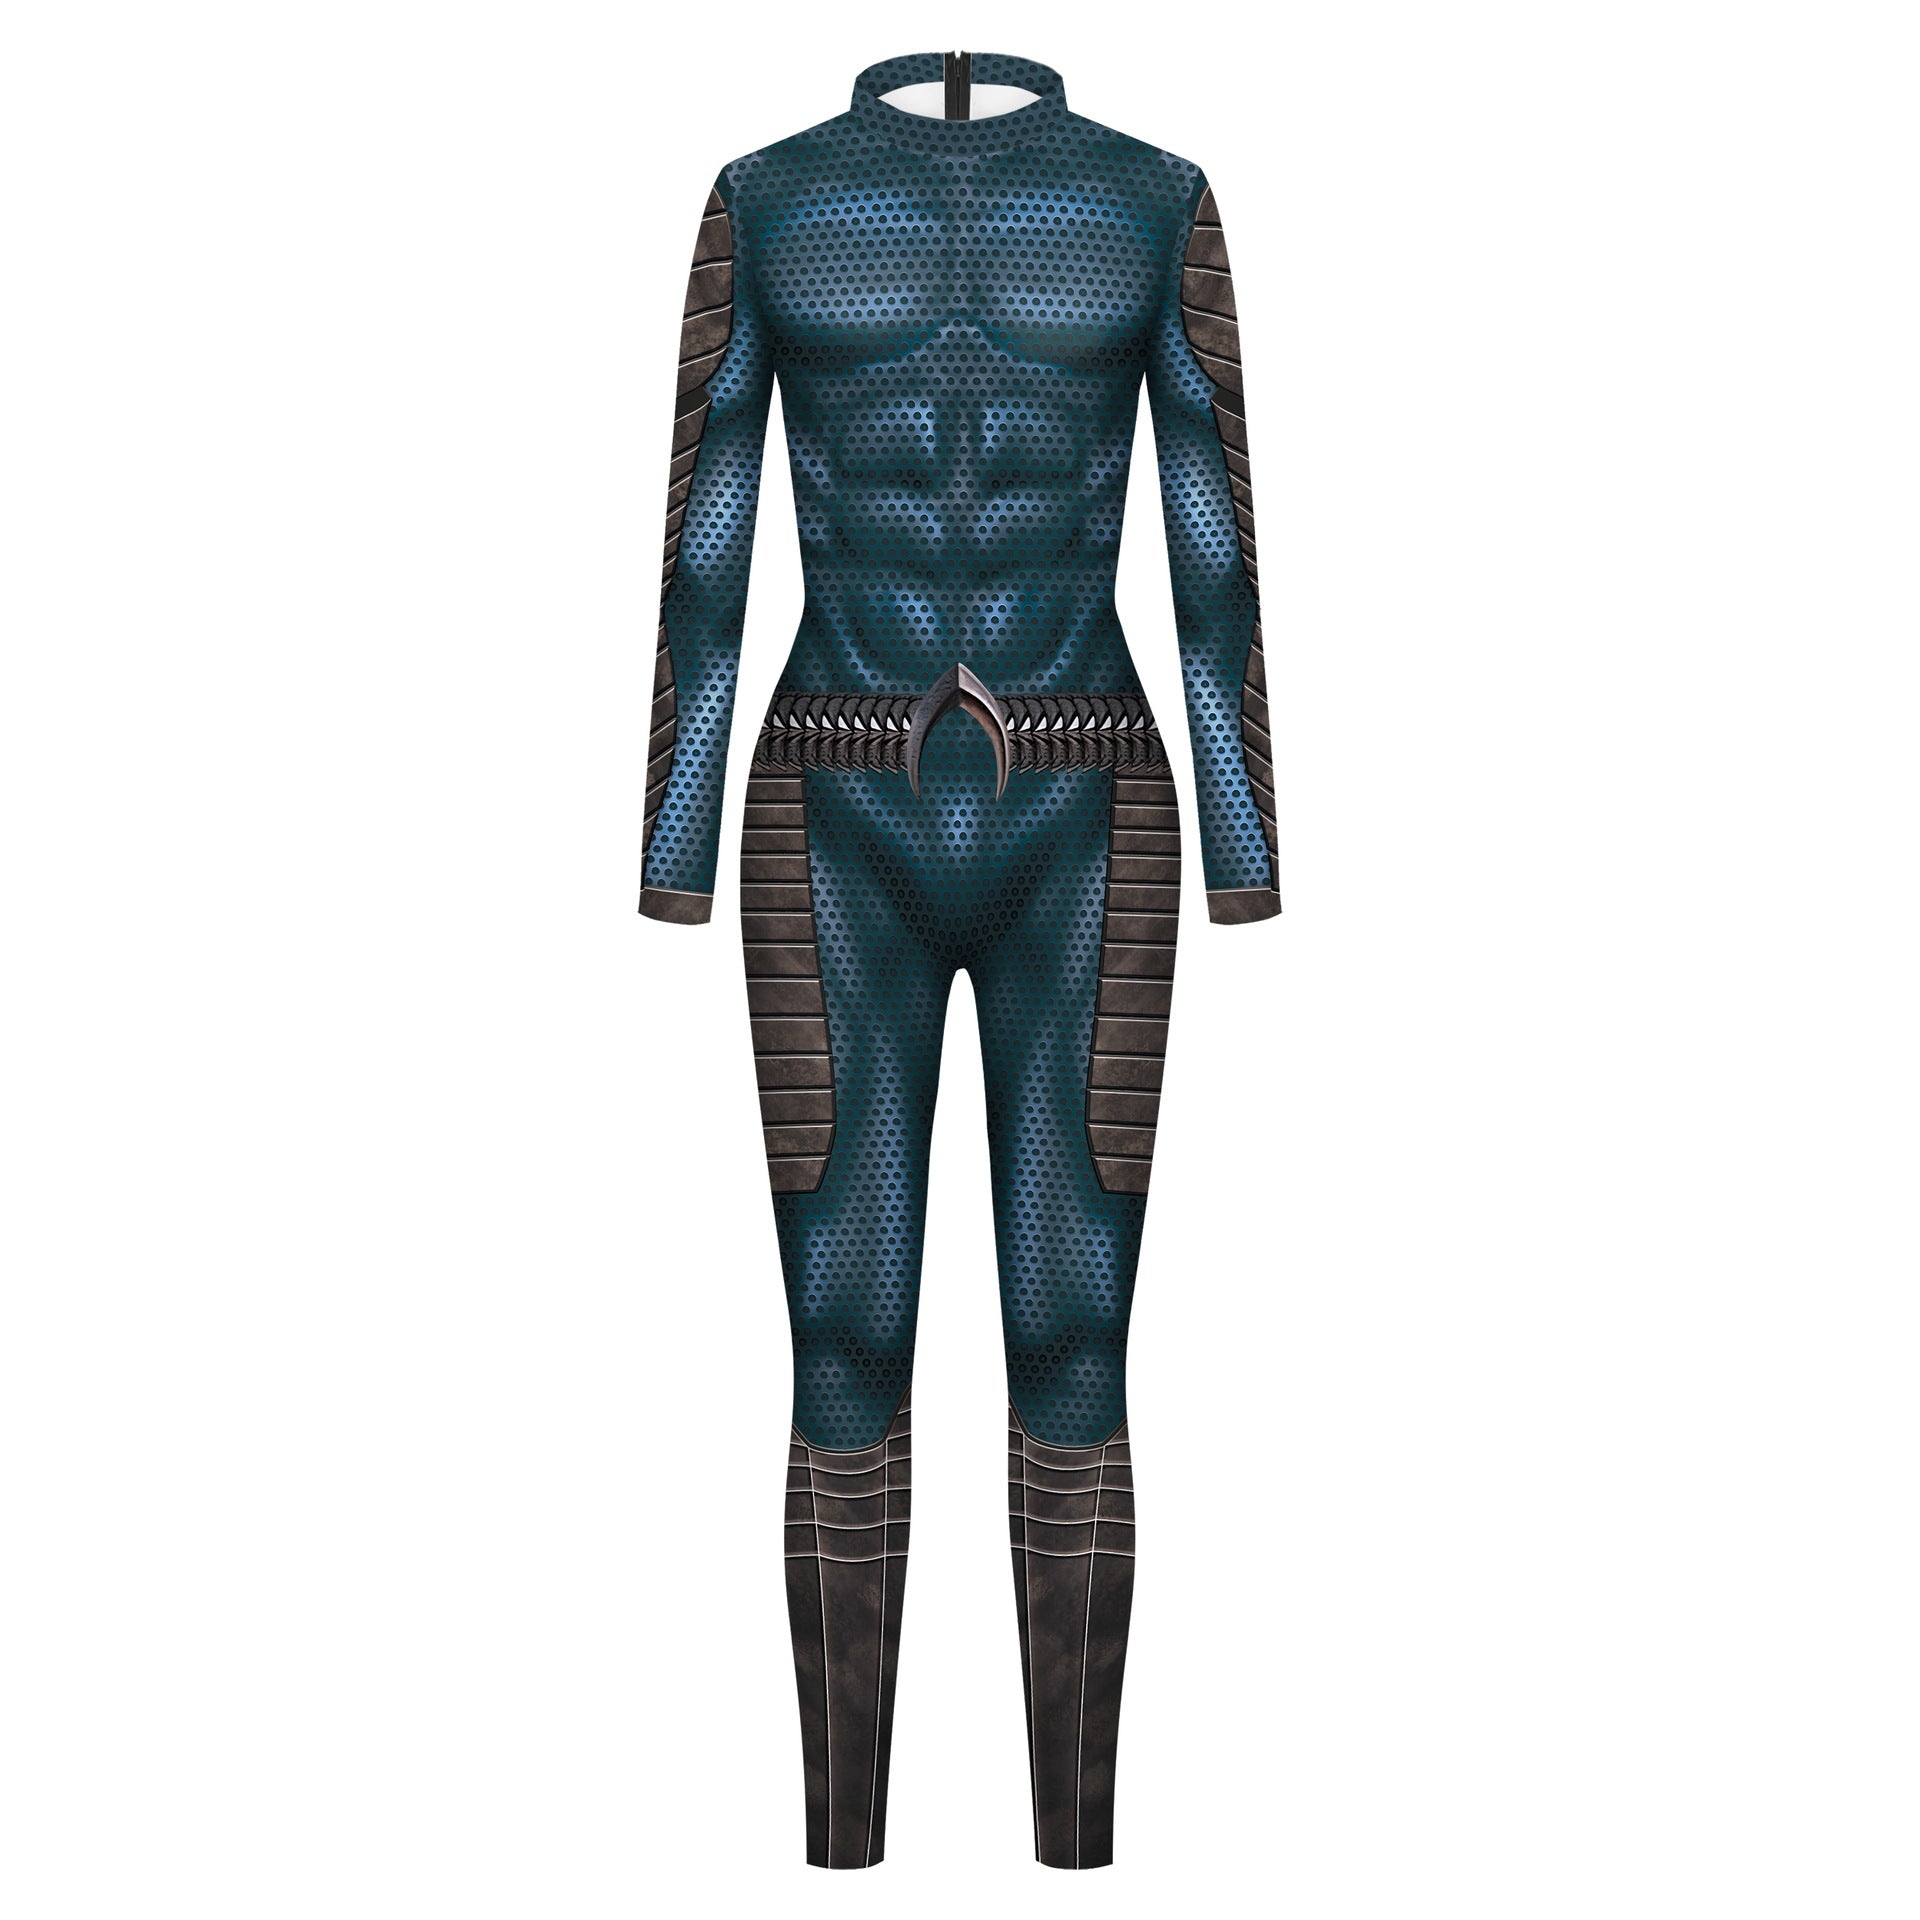 Full-body superhero costume featuring a muscular design with vibrant blue and black patterns, enhanced by digital printing, metallic accents, and a high collar. The suit includes long sleeves and Digital Halloween Costume Leggings - Spooky Tights by Maramalive™—perfect as Halloween costume tights.